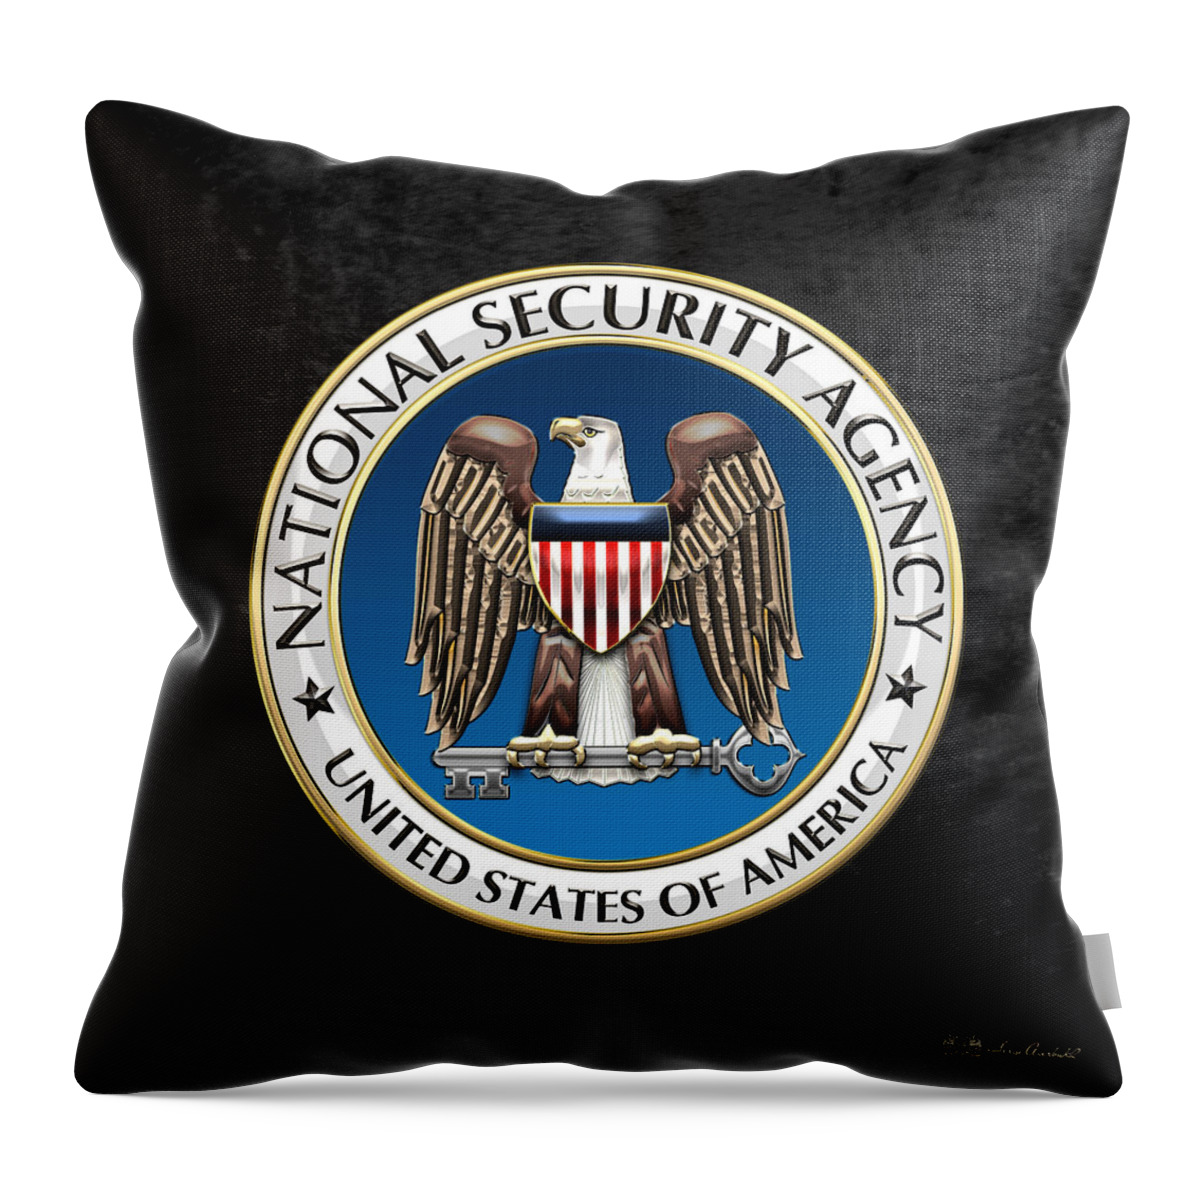 'military Insignia & Heraldry 3d' Collection By Serge Averbukh Throw Pillow featuring the digital art National Security Agency - N S A Emblem on Black Velvet by Serge Averbukh